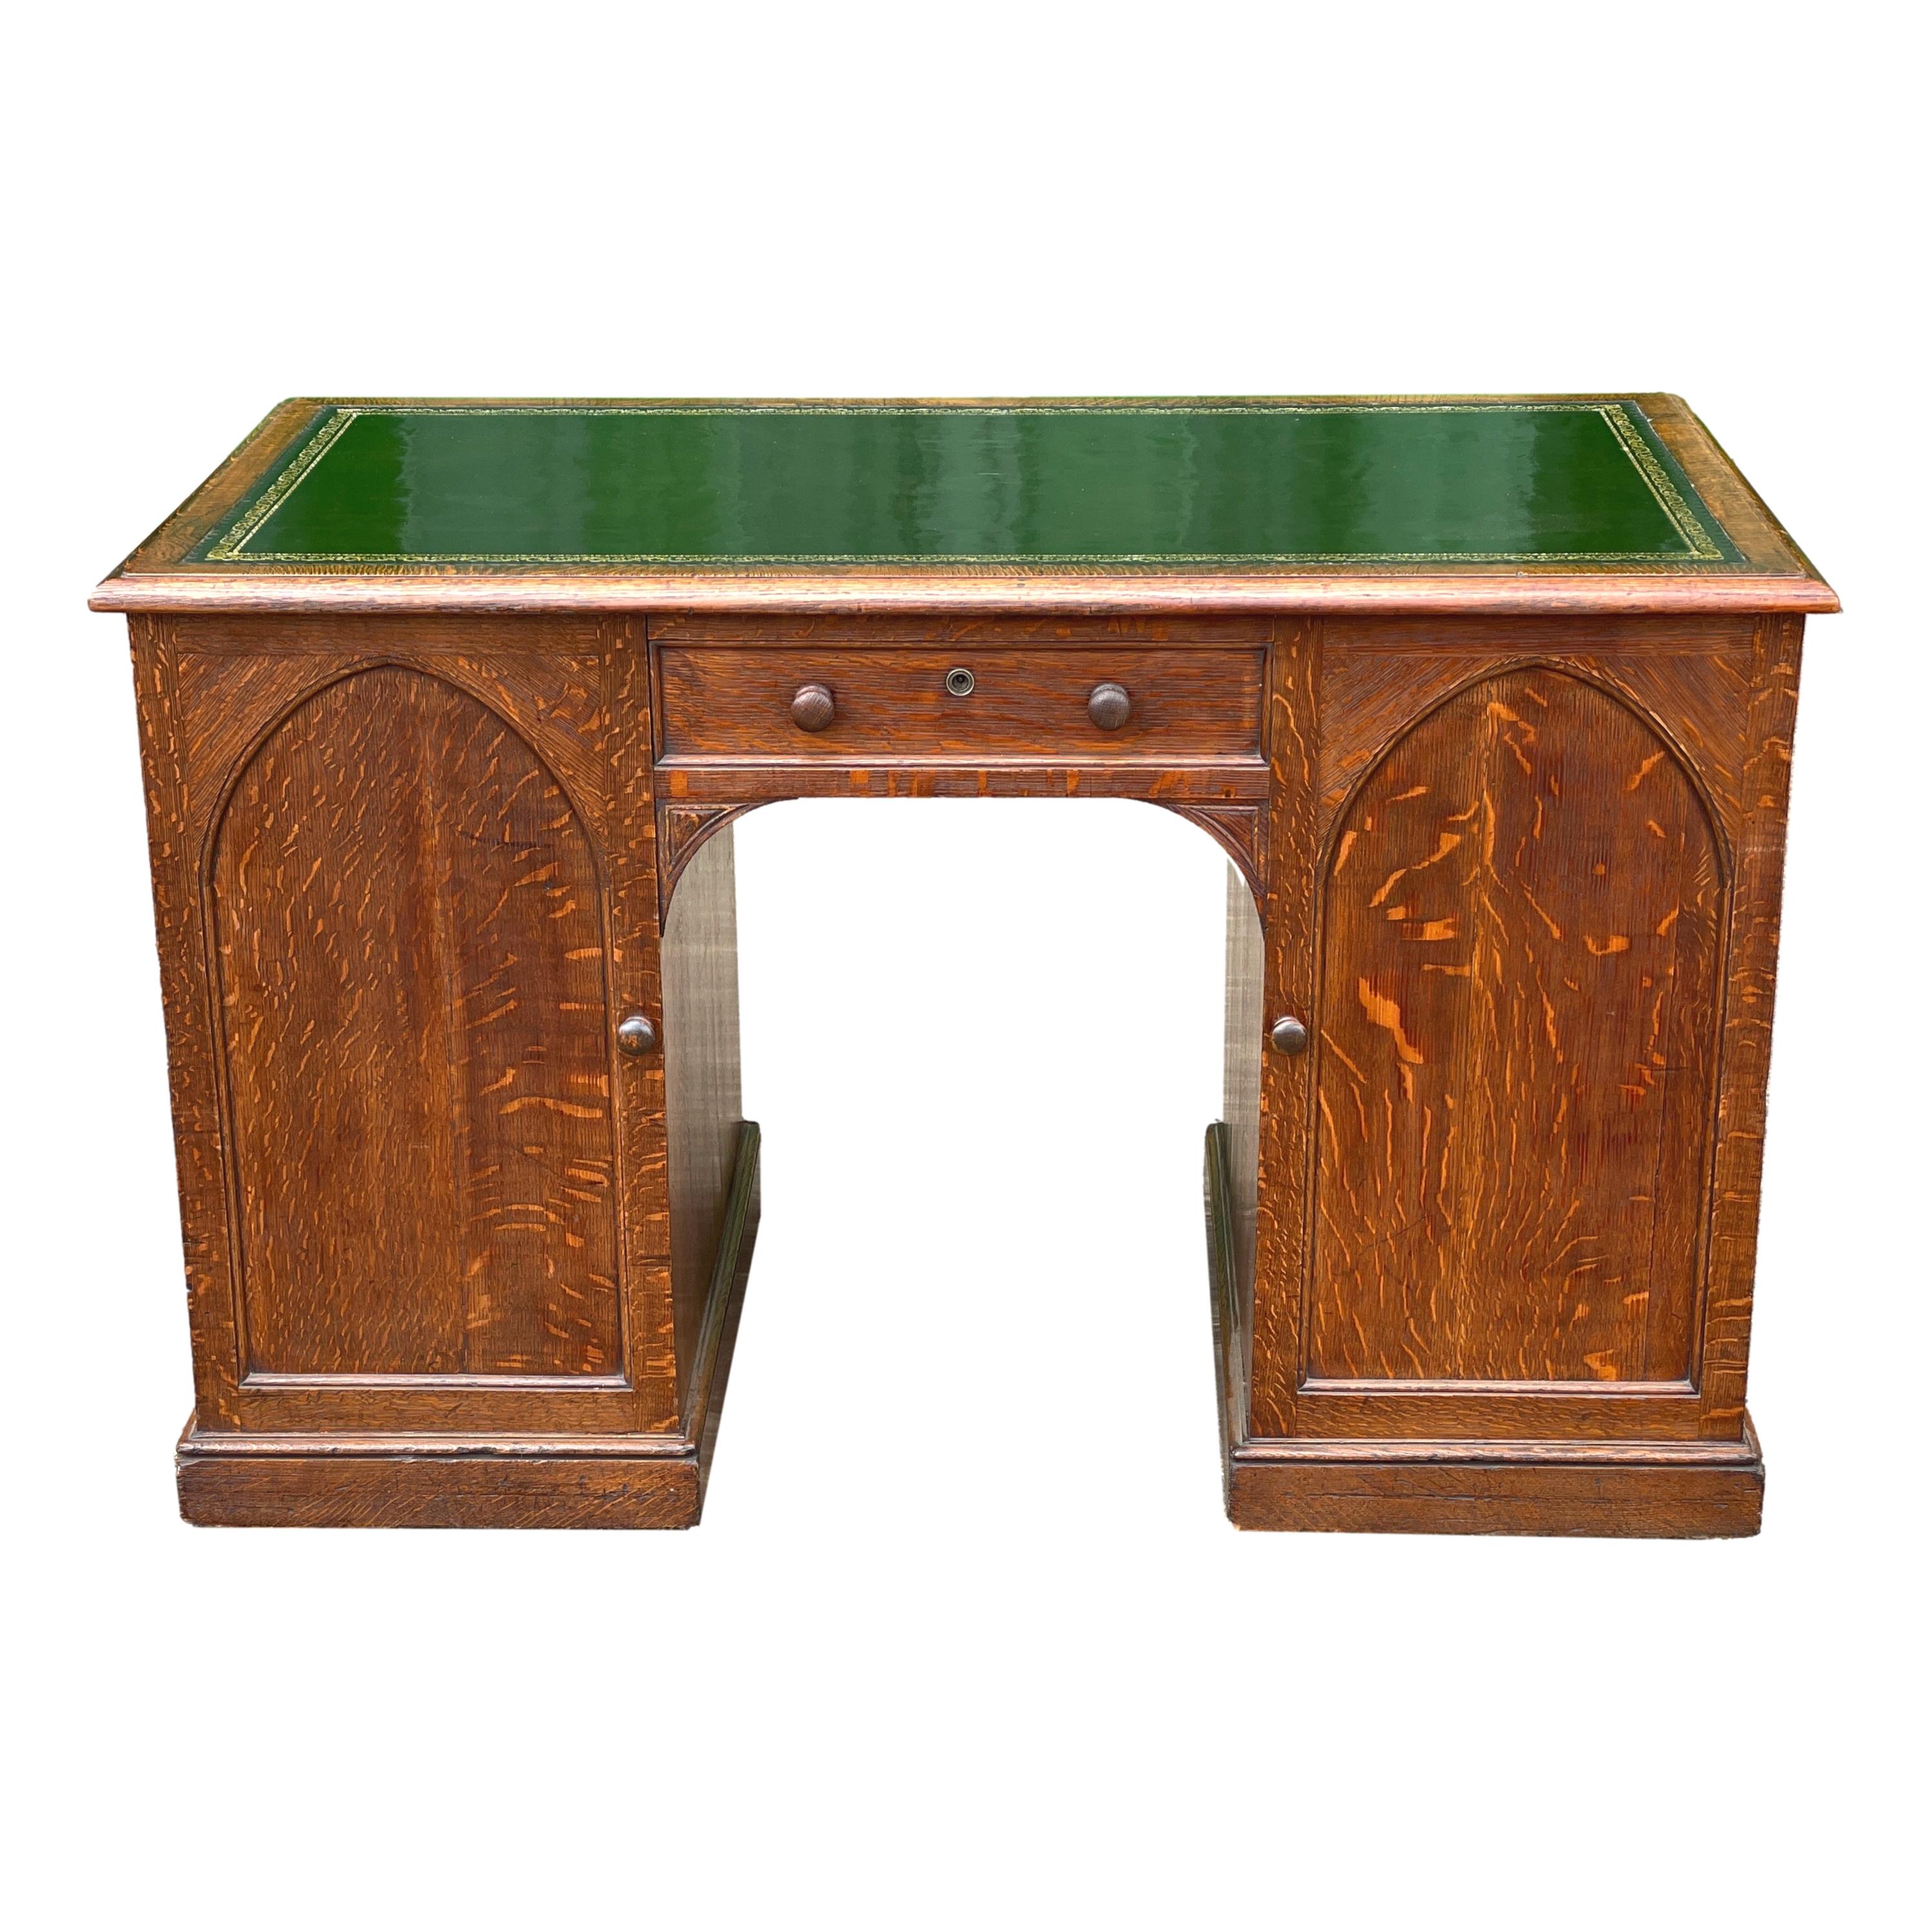 English 19th Century Oak Pedestal Desk In Good Condition For Sale In Bedfordshire, GB